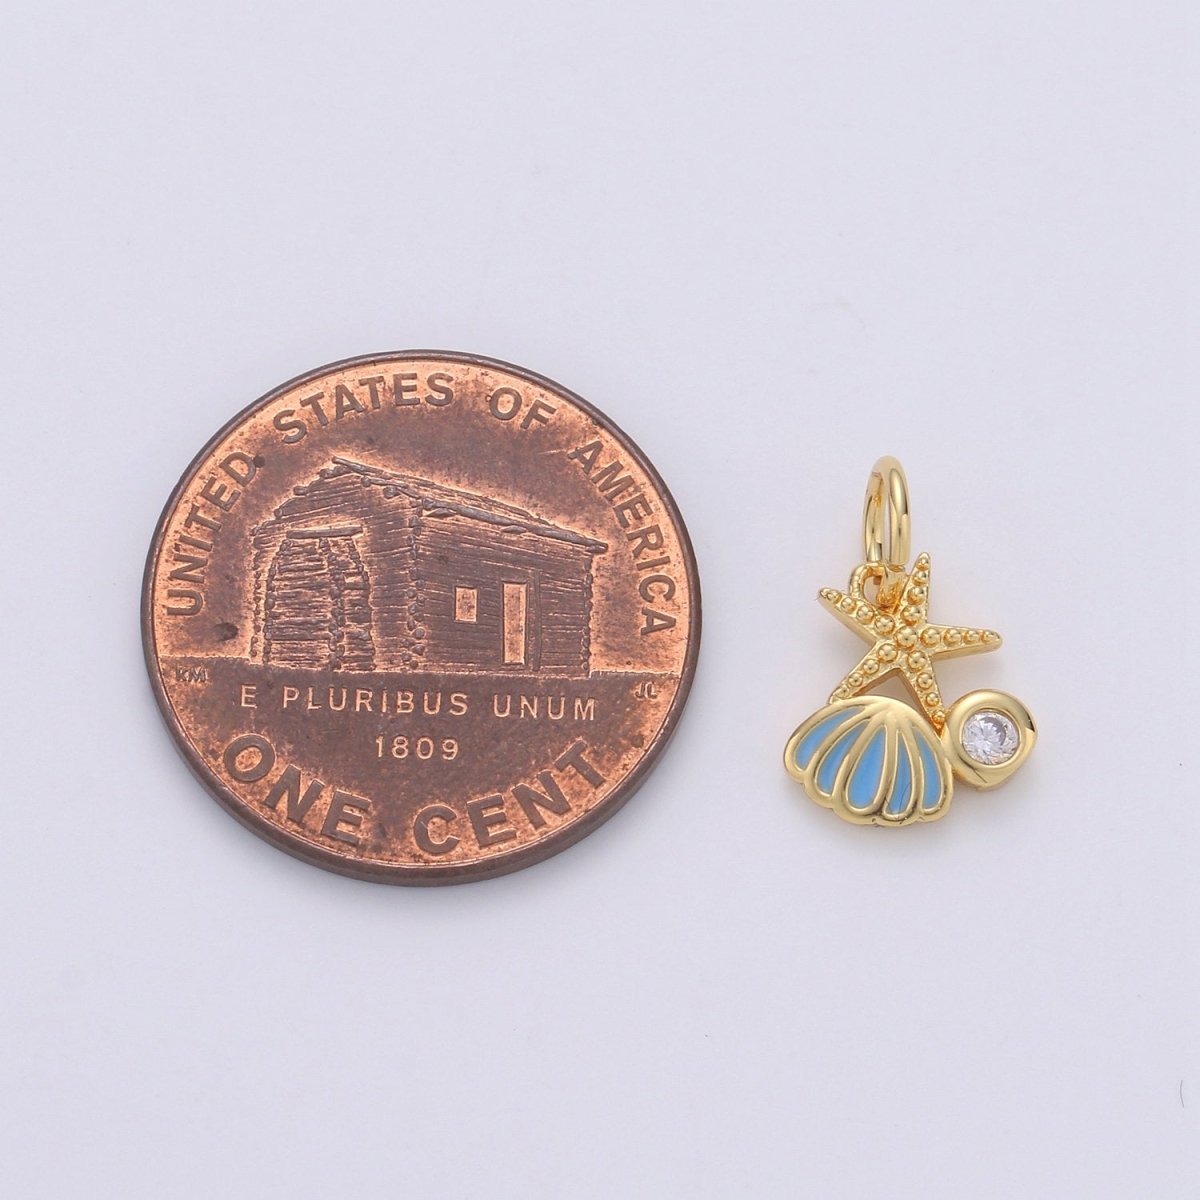 Shell 24K Gold Filled Tiny Charms, Gold Filled Star Fish Charm, Gold Starfish ,Gold Beach charm Under the sea Jewelry Inspired D-558 - DLUXCA